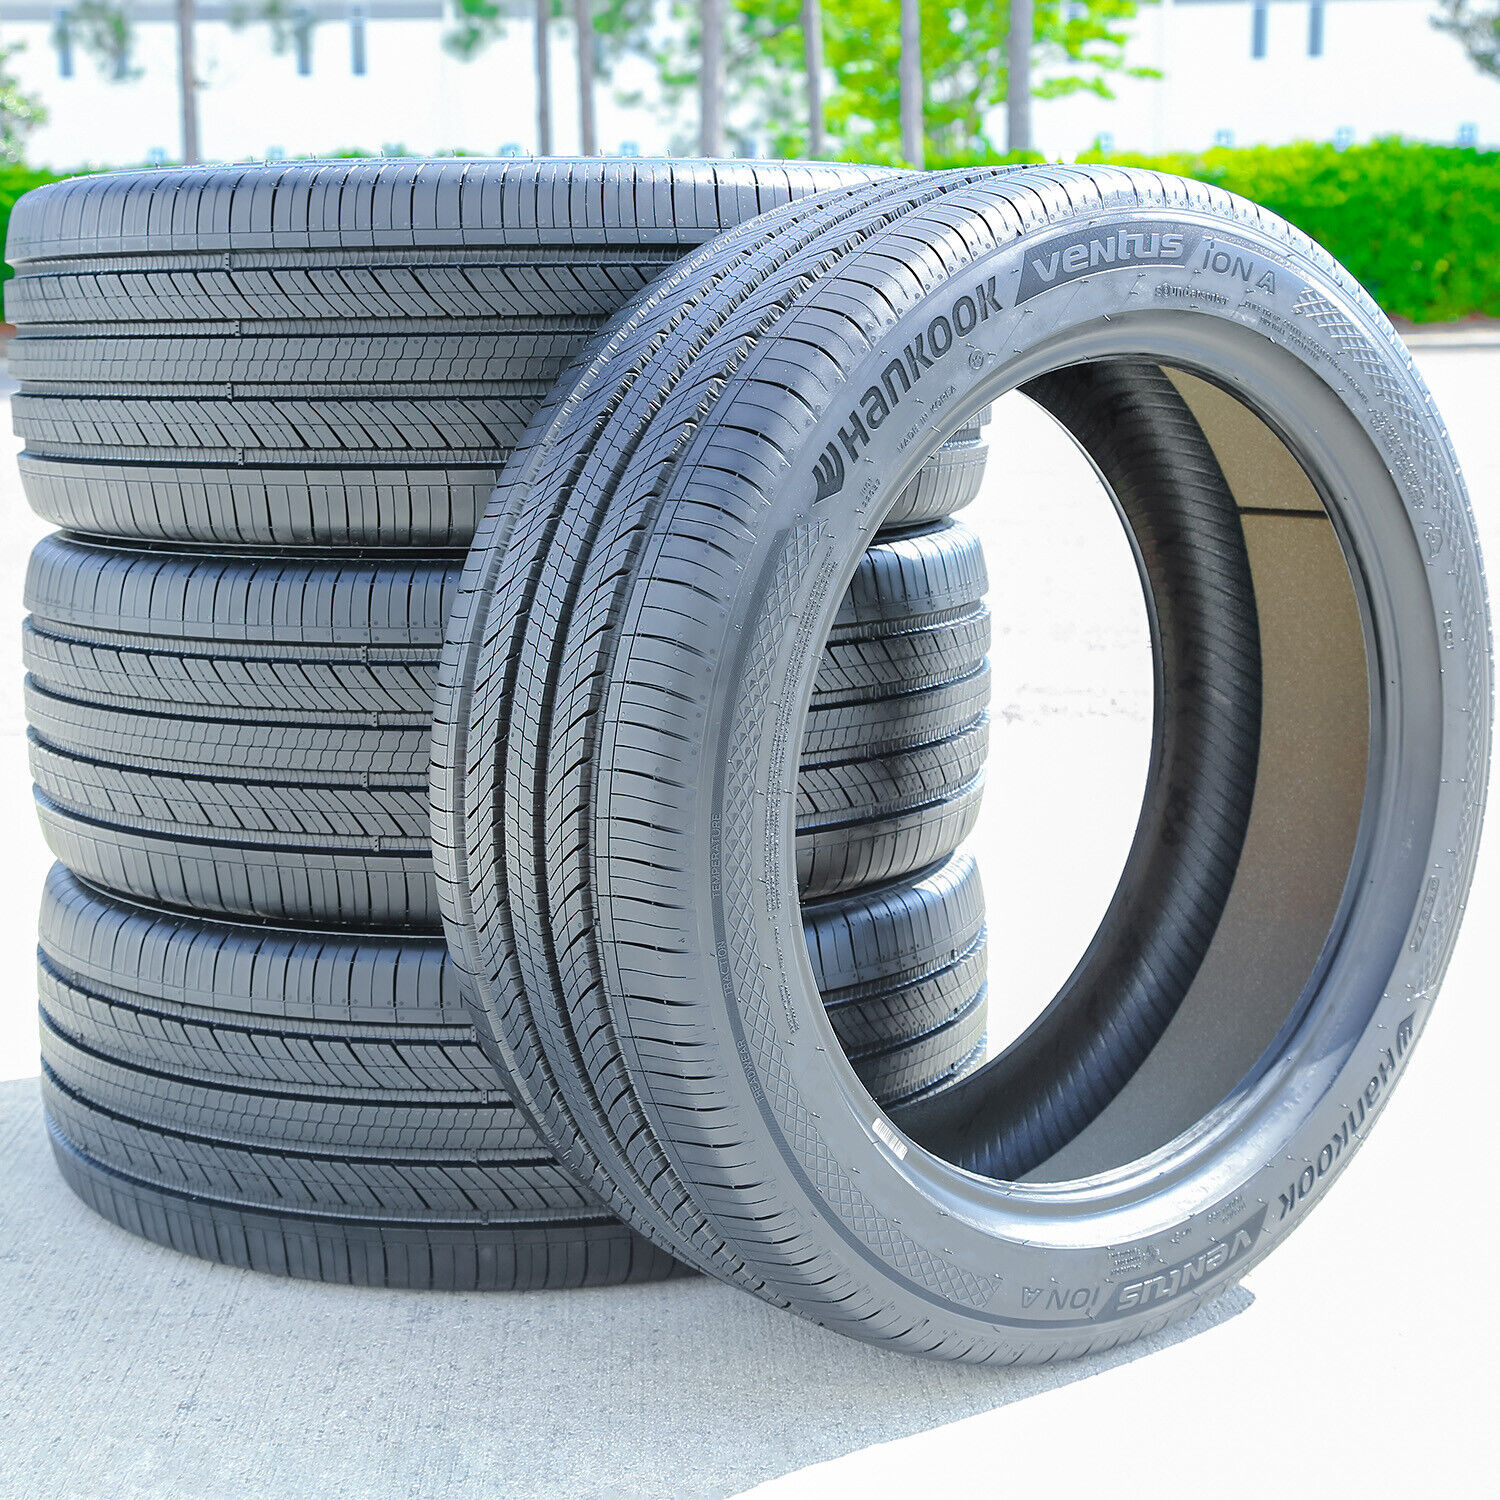 4 Tires 235/40R19 Hankook Ventus iON A AS A/S High Performance 96W XL